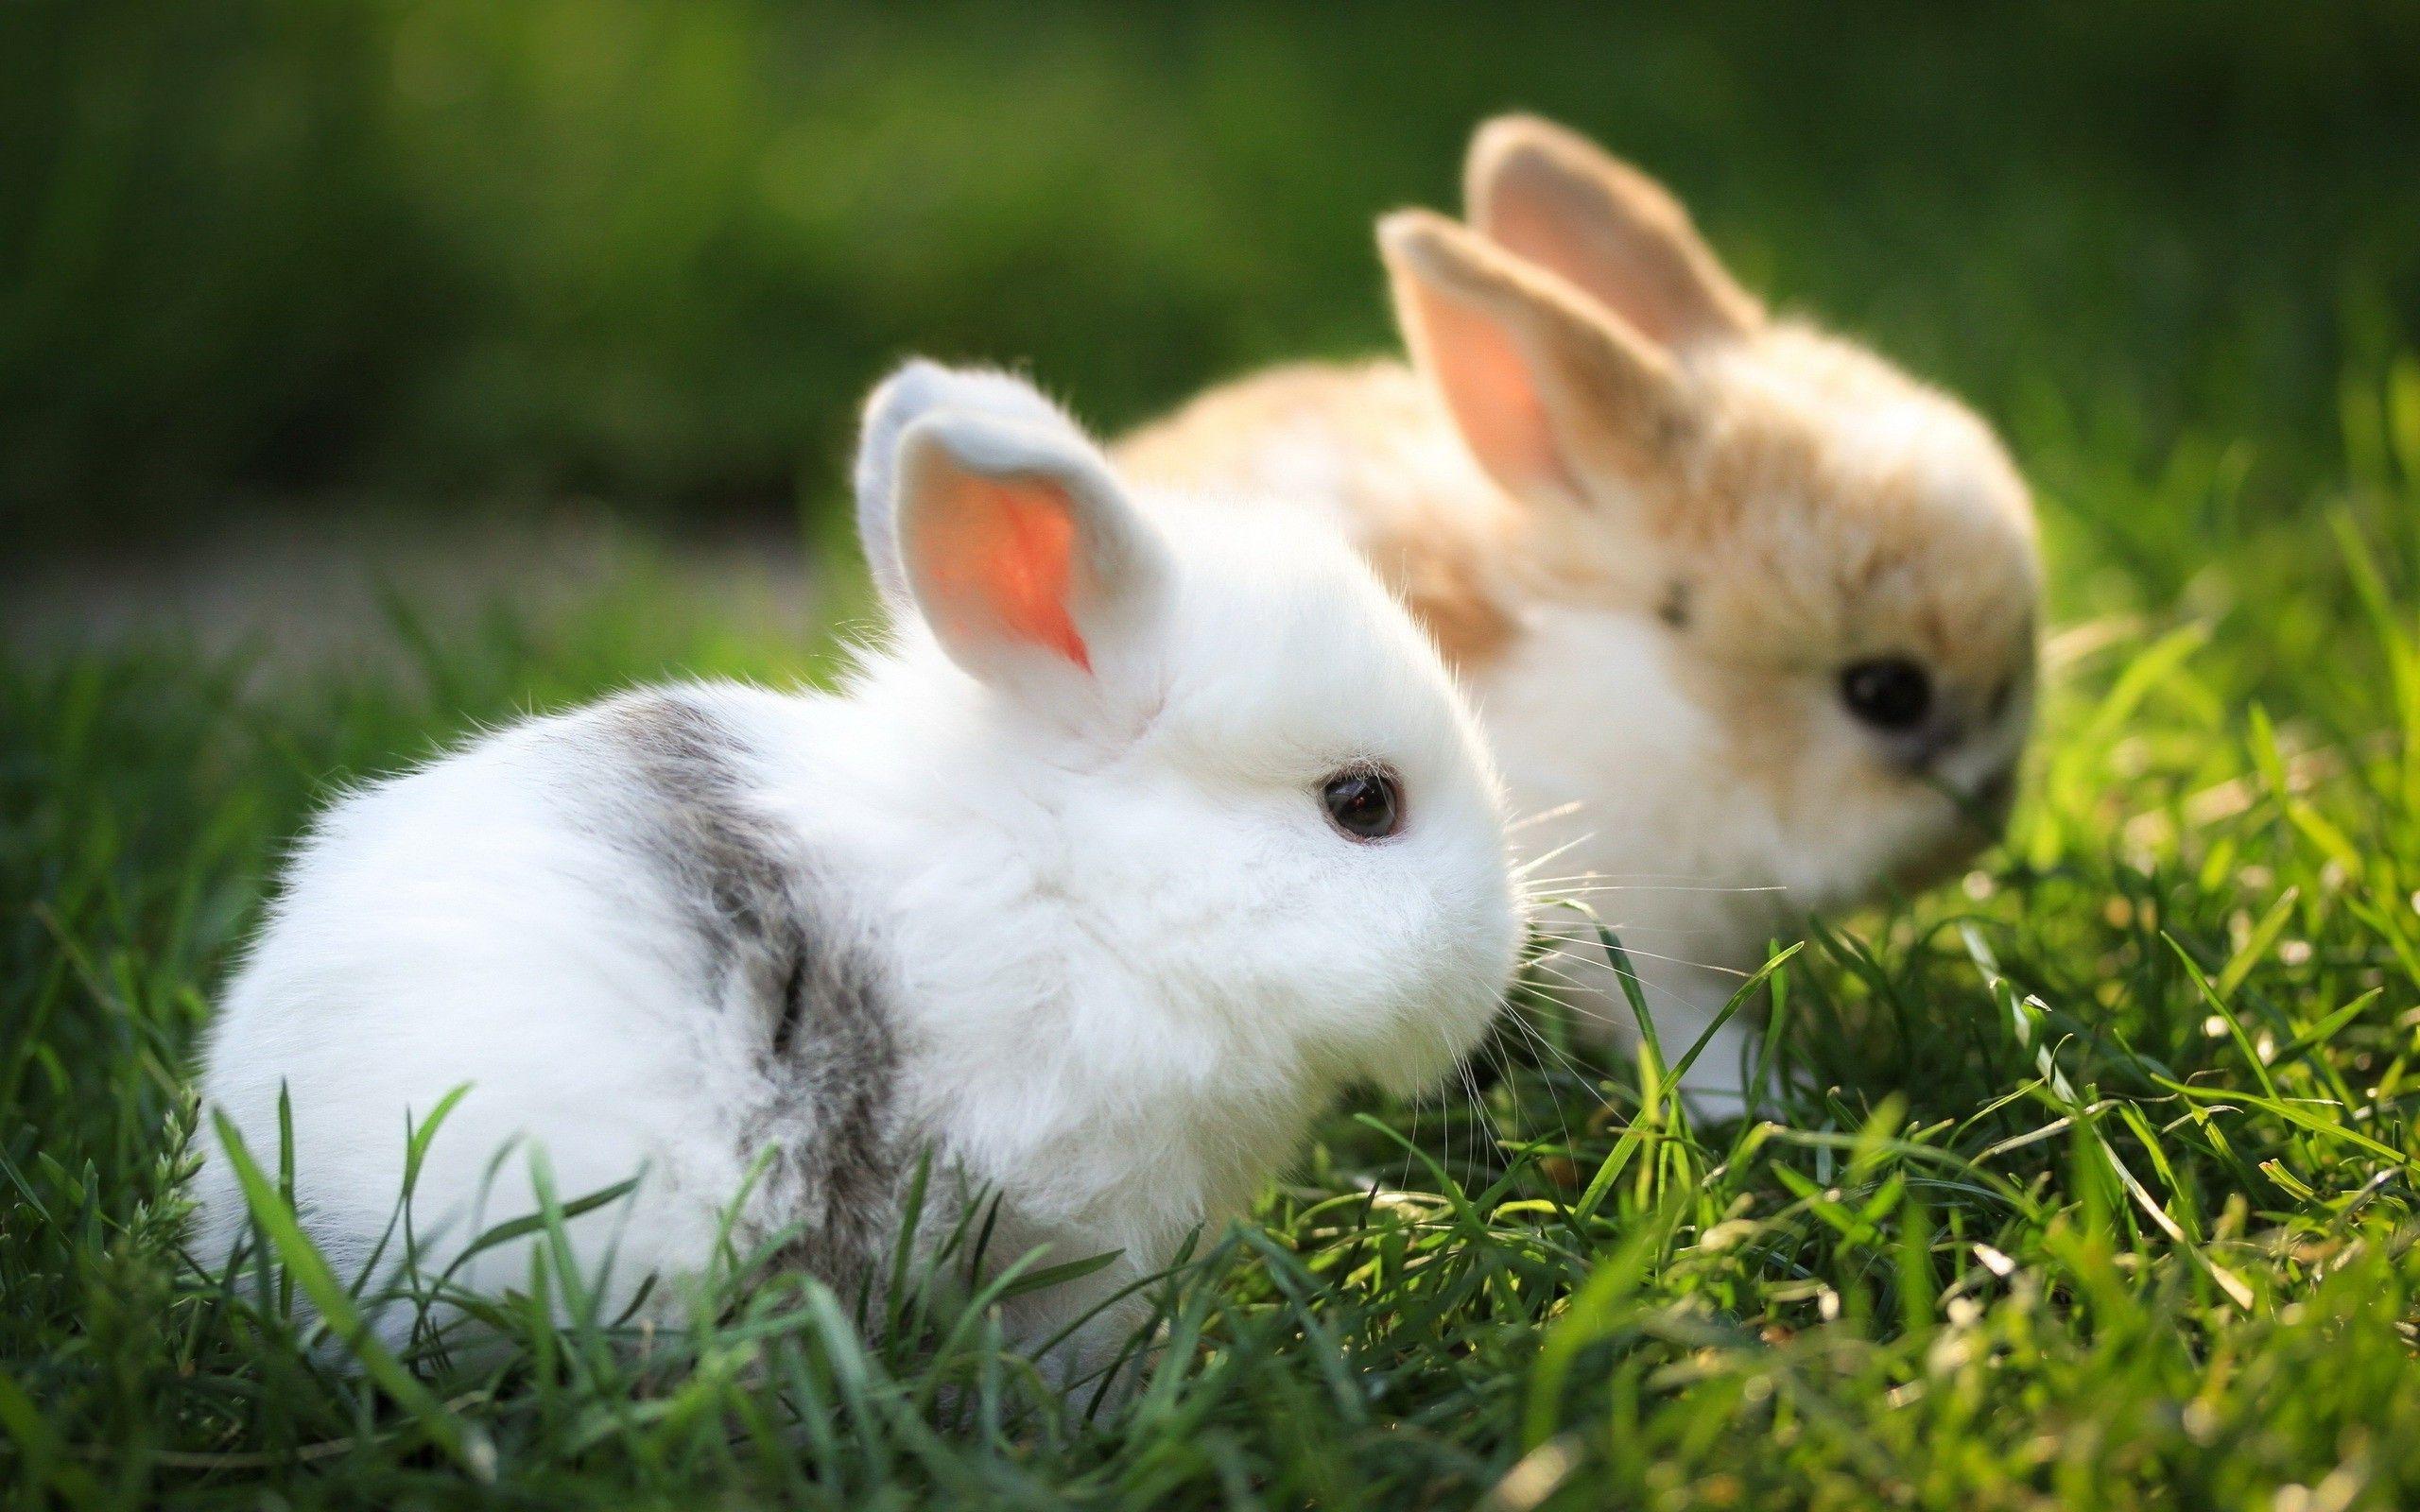 Baby Bunny Cool HD Wallpaper Picture on ScreenCrot